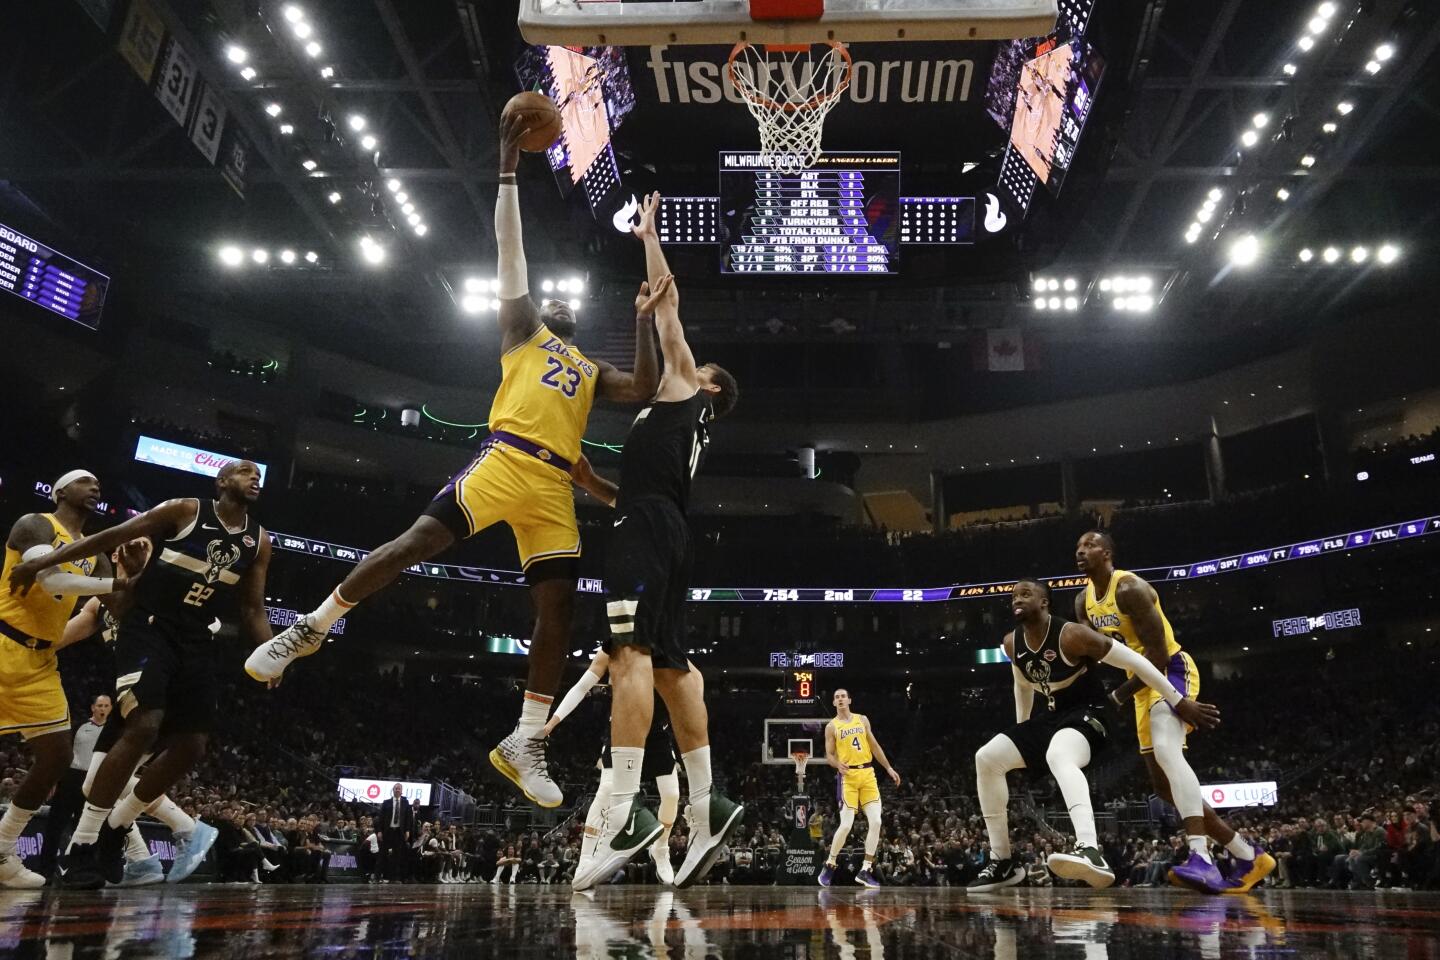 Lakers forward LeBron James puts up a shot during the first half of a game Dec. 19 against the Bucks.